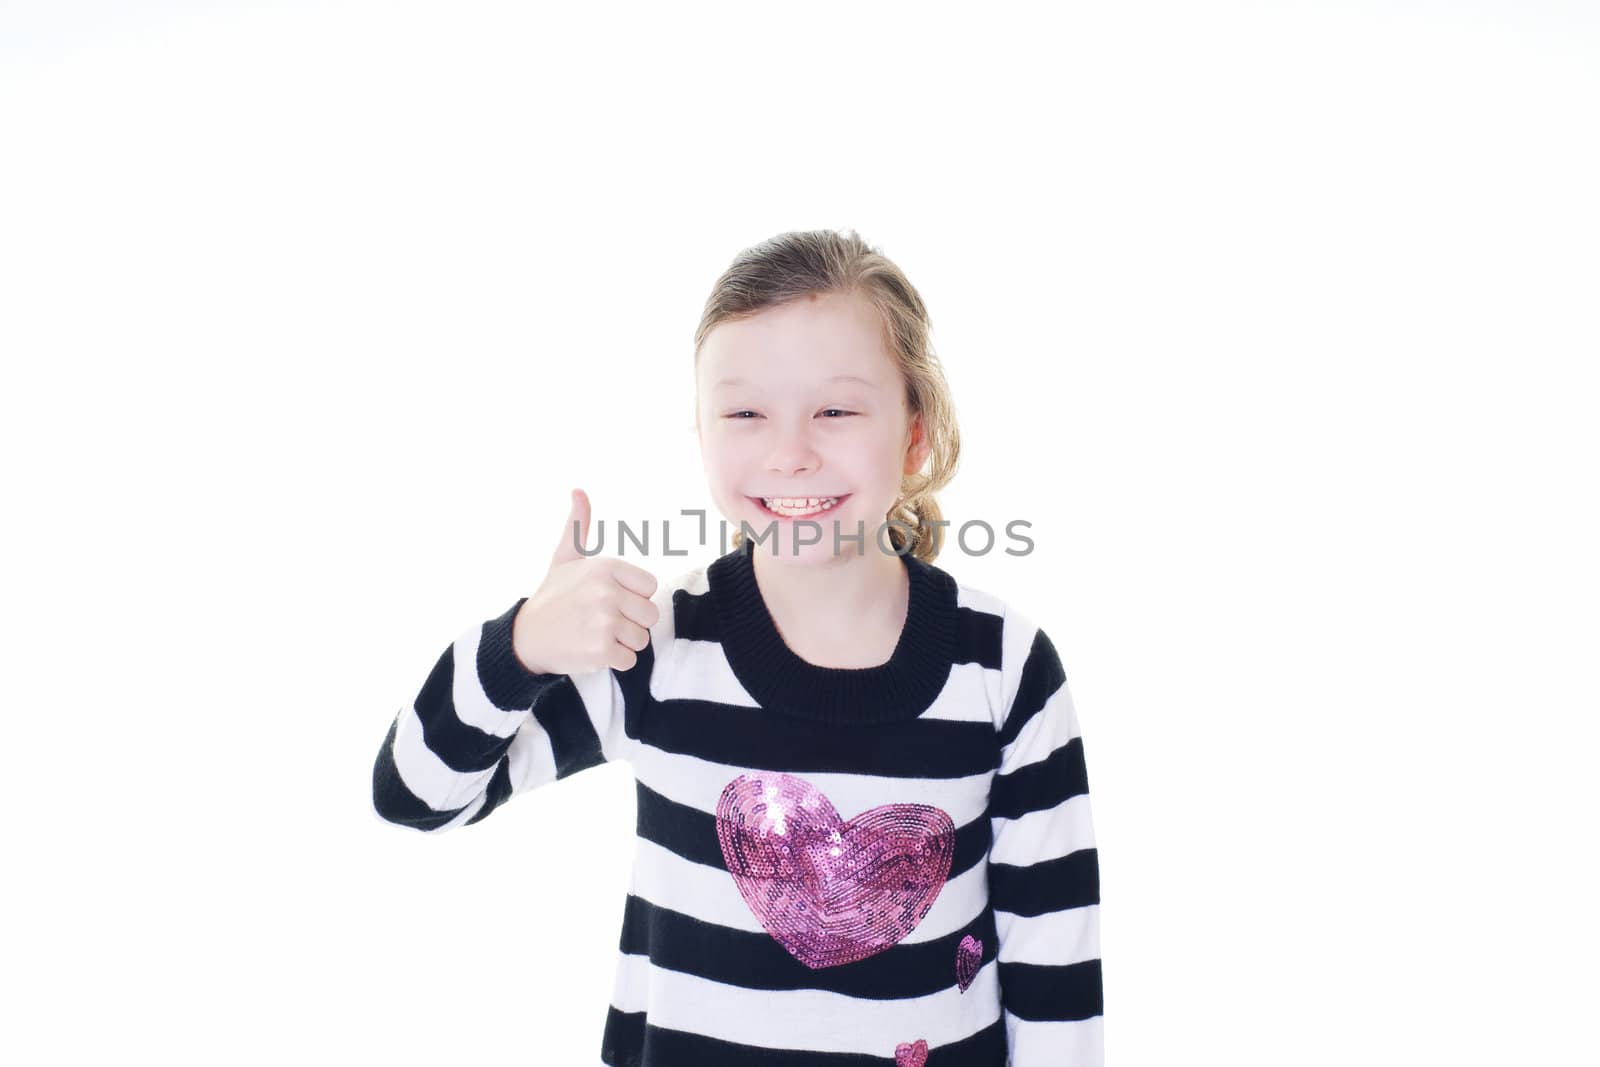 young girl giving a thumbs up gesture isolated on white